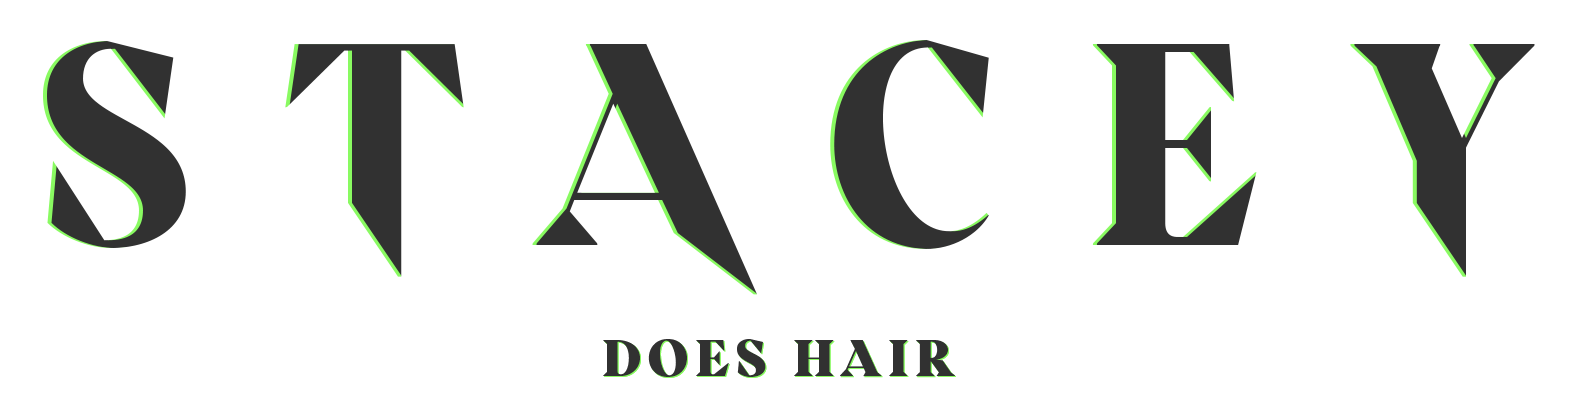 Stacey Does Hair Logo